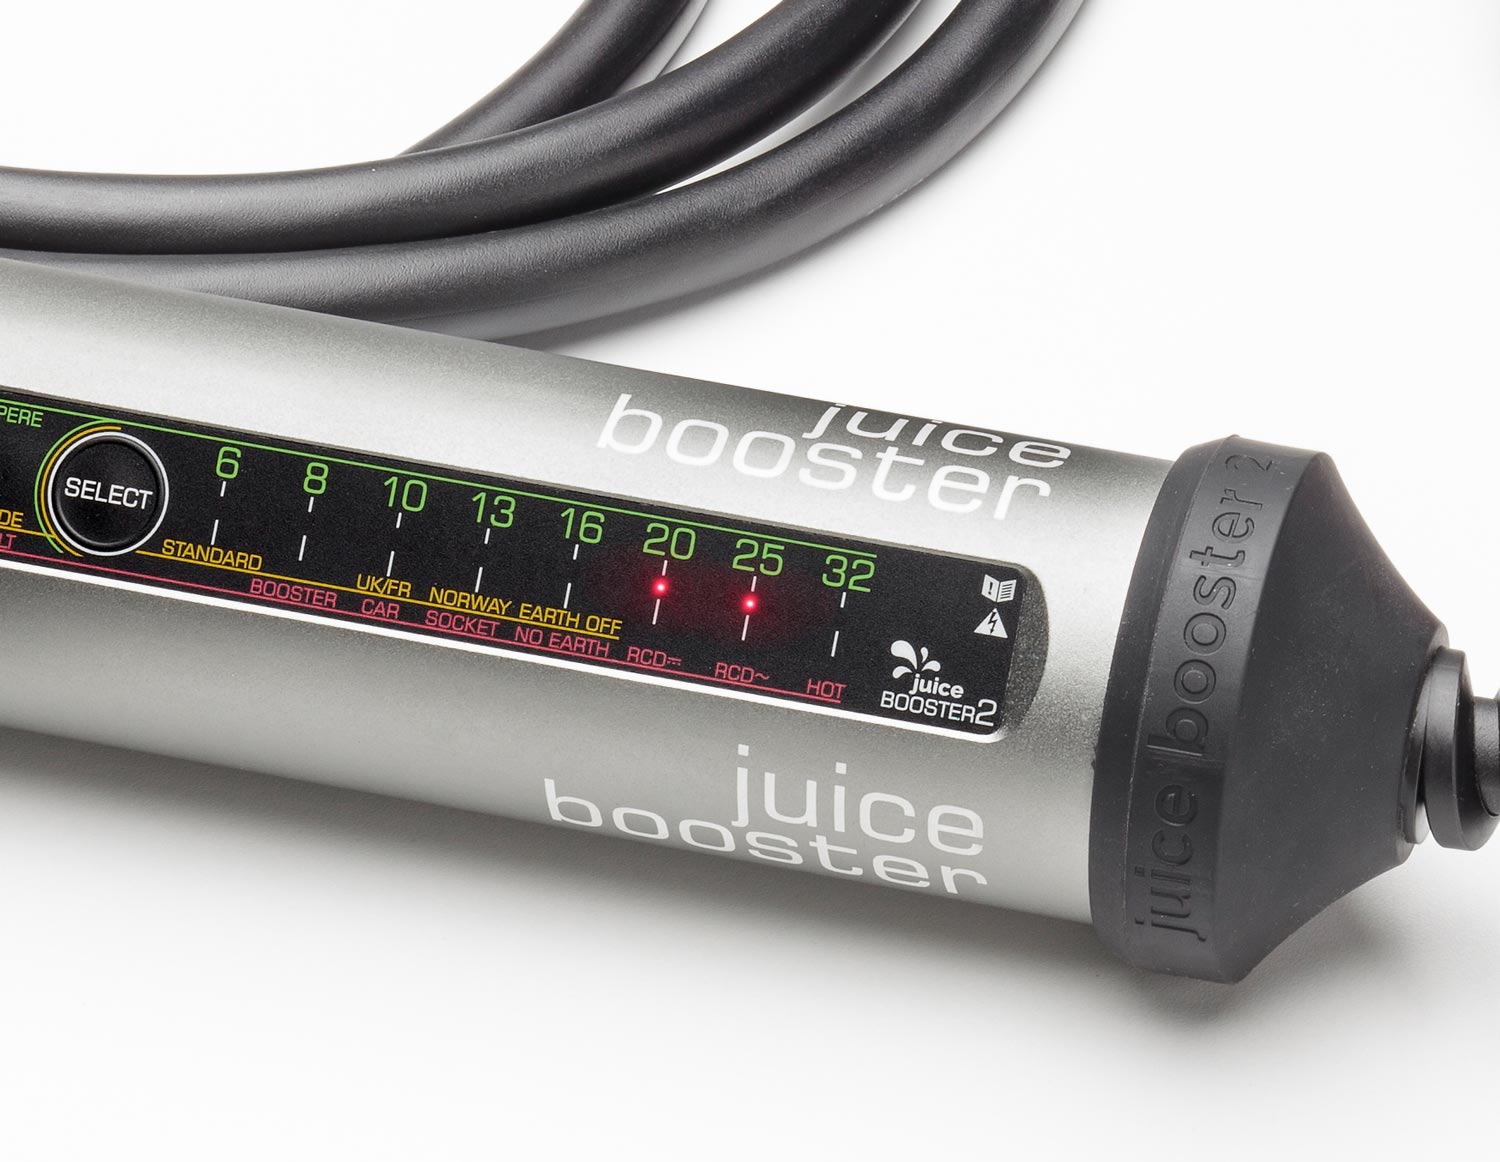 Juice Booster 2: The mobile charging station for your electric